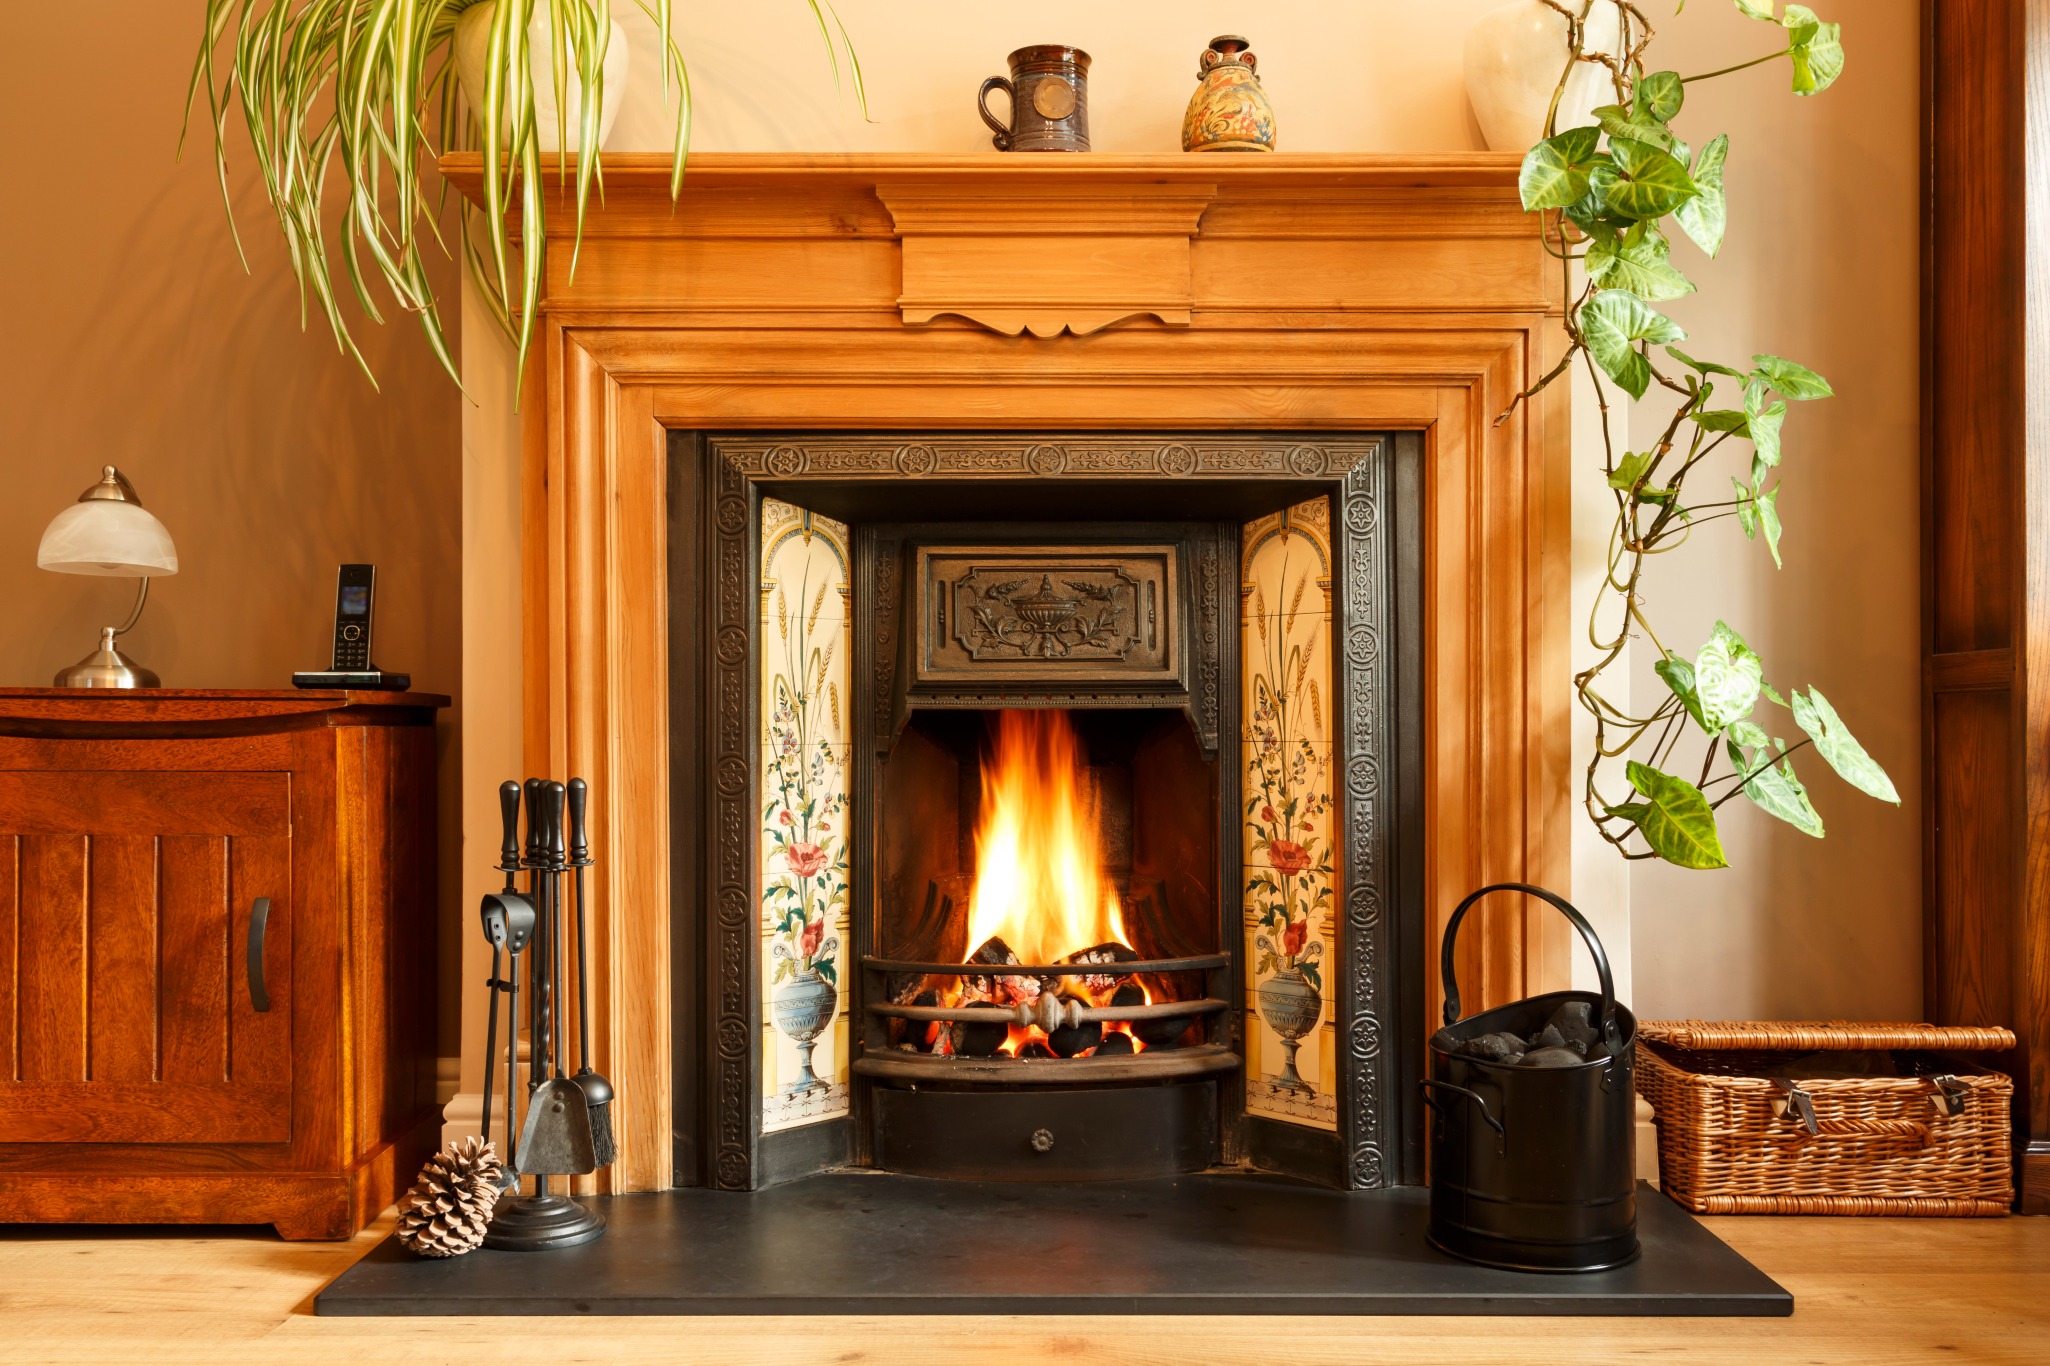 A period feature fireplace